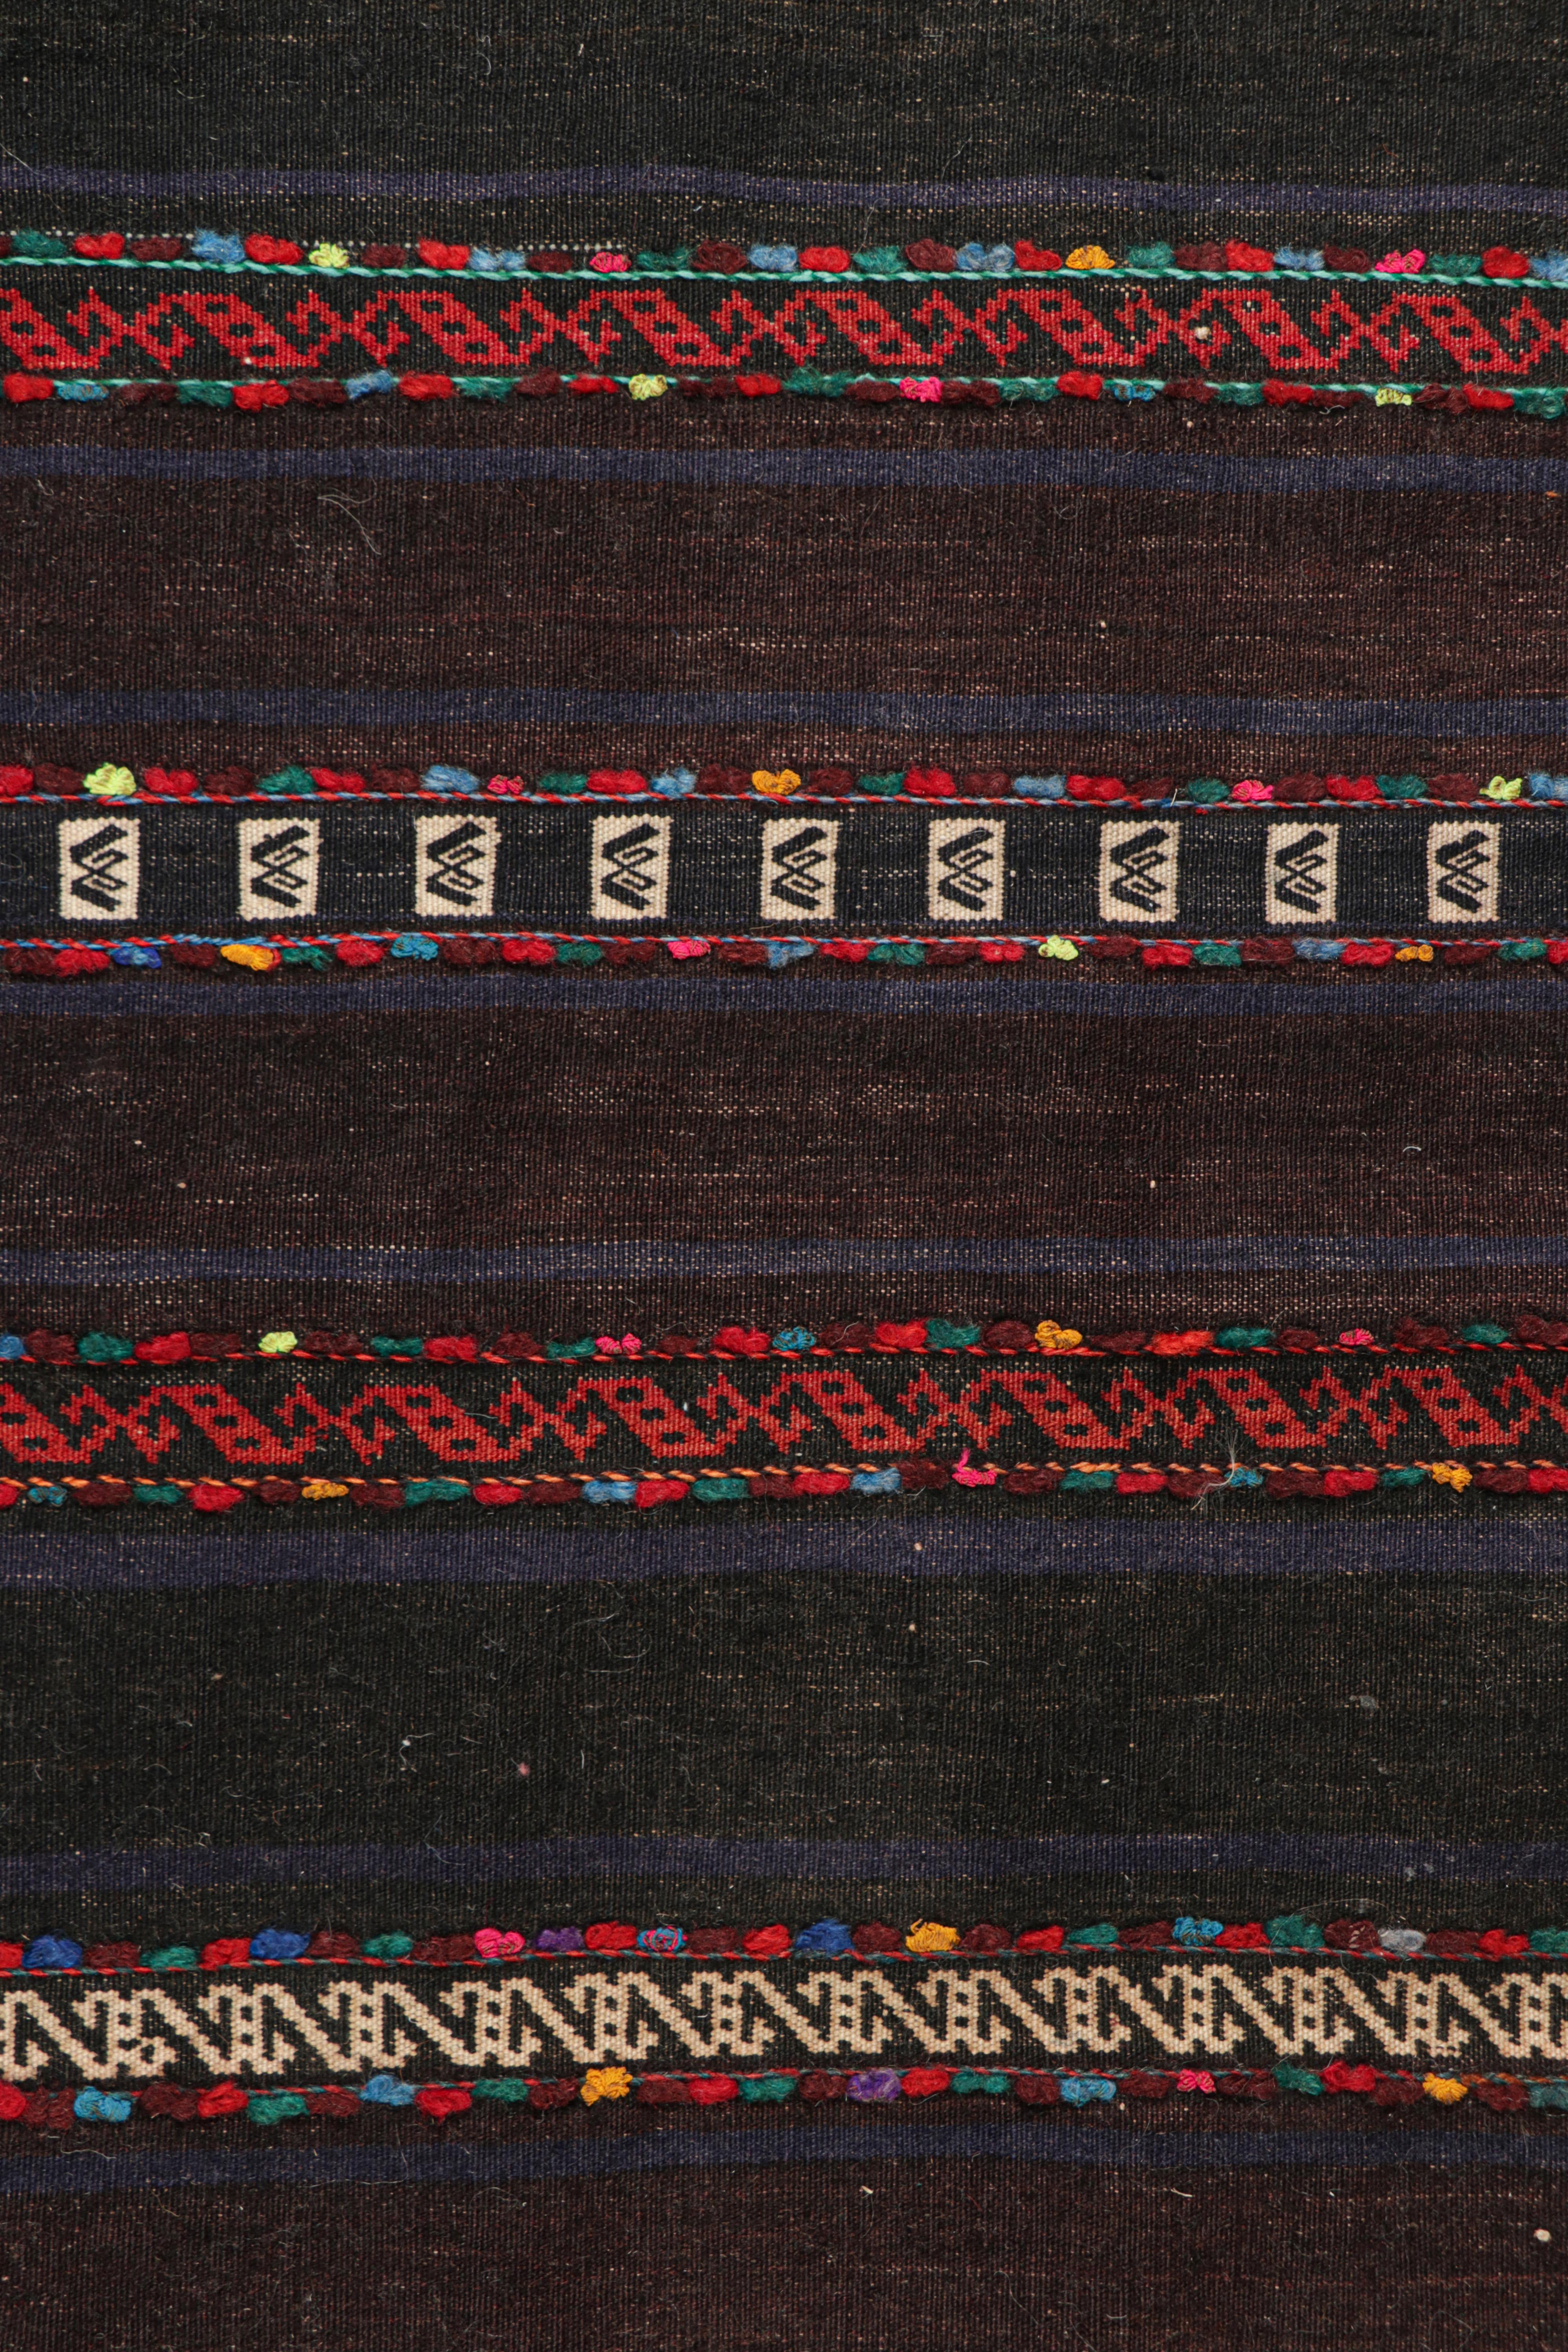 Tribal Vintage Afghan Kilim with Stripes and Geometric Patterns, from Rug & Kilim For Sale